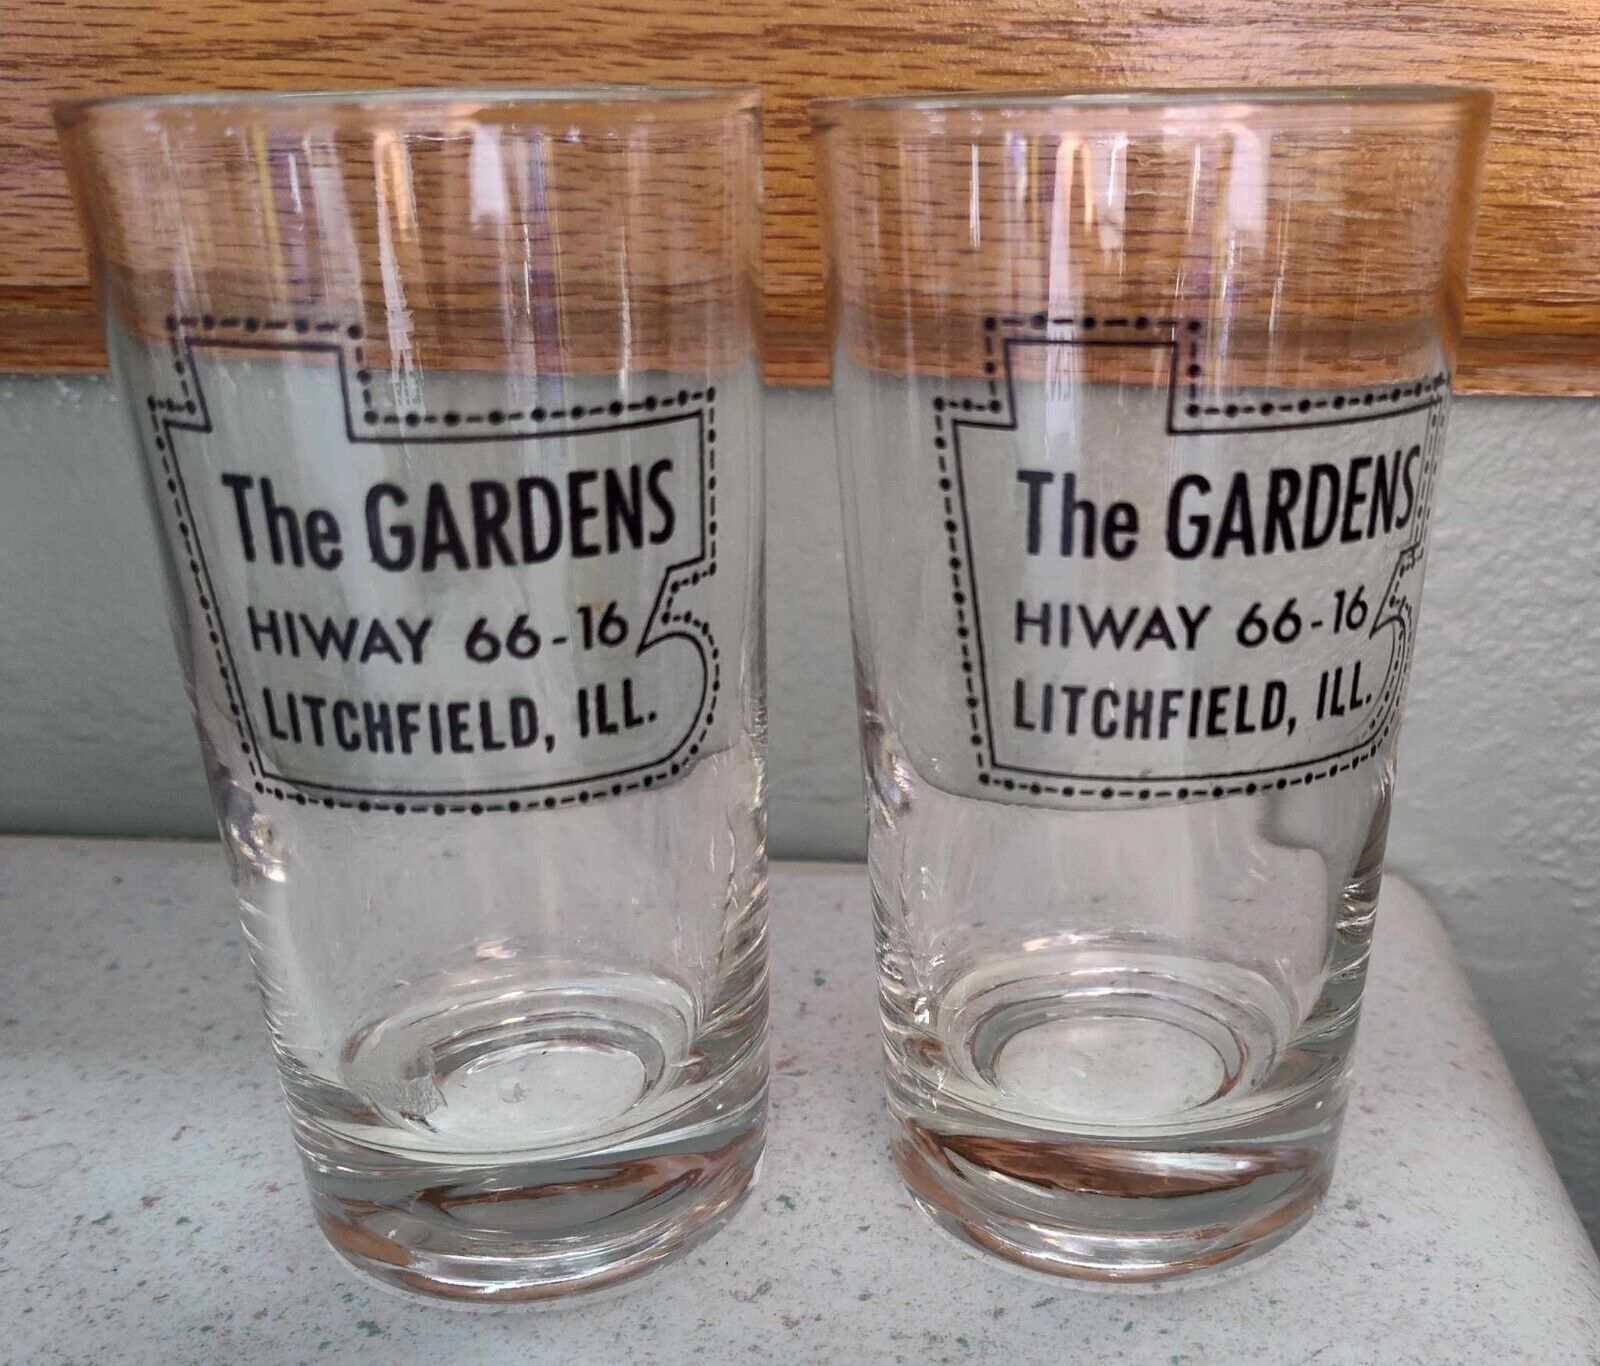 Pair of The Gardens Litchfield IL Route Highway 66 - 16 Vintage Glasses